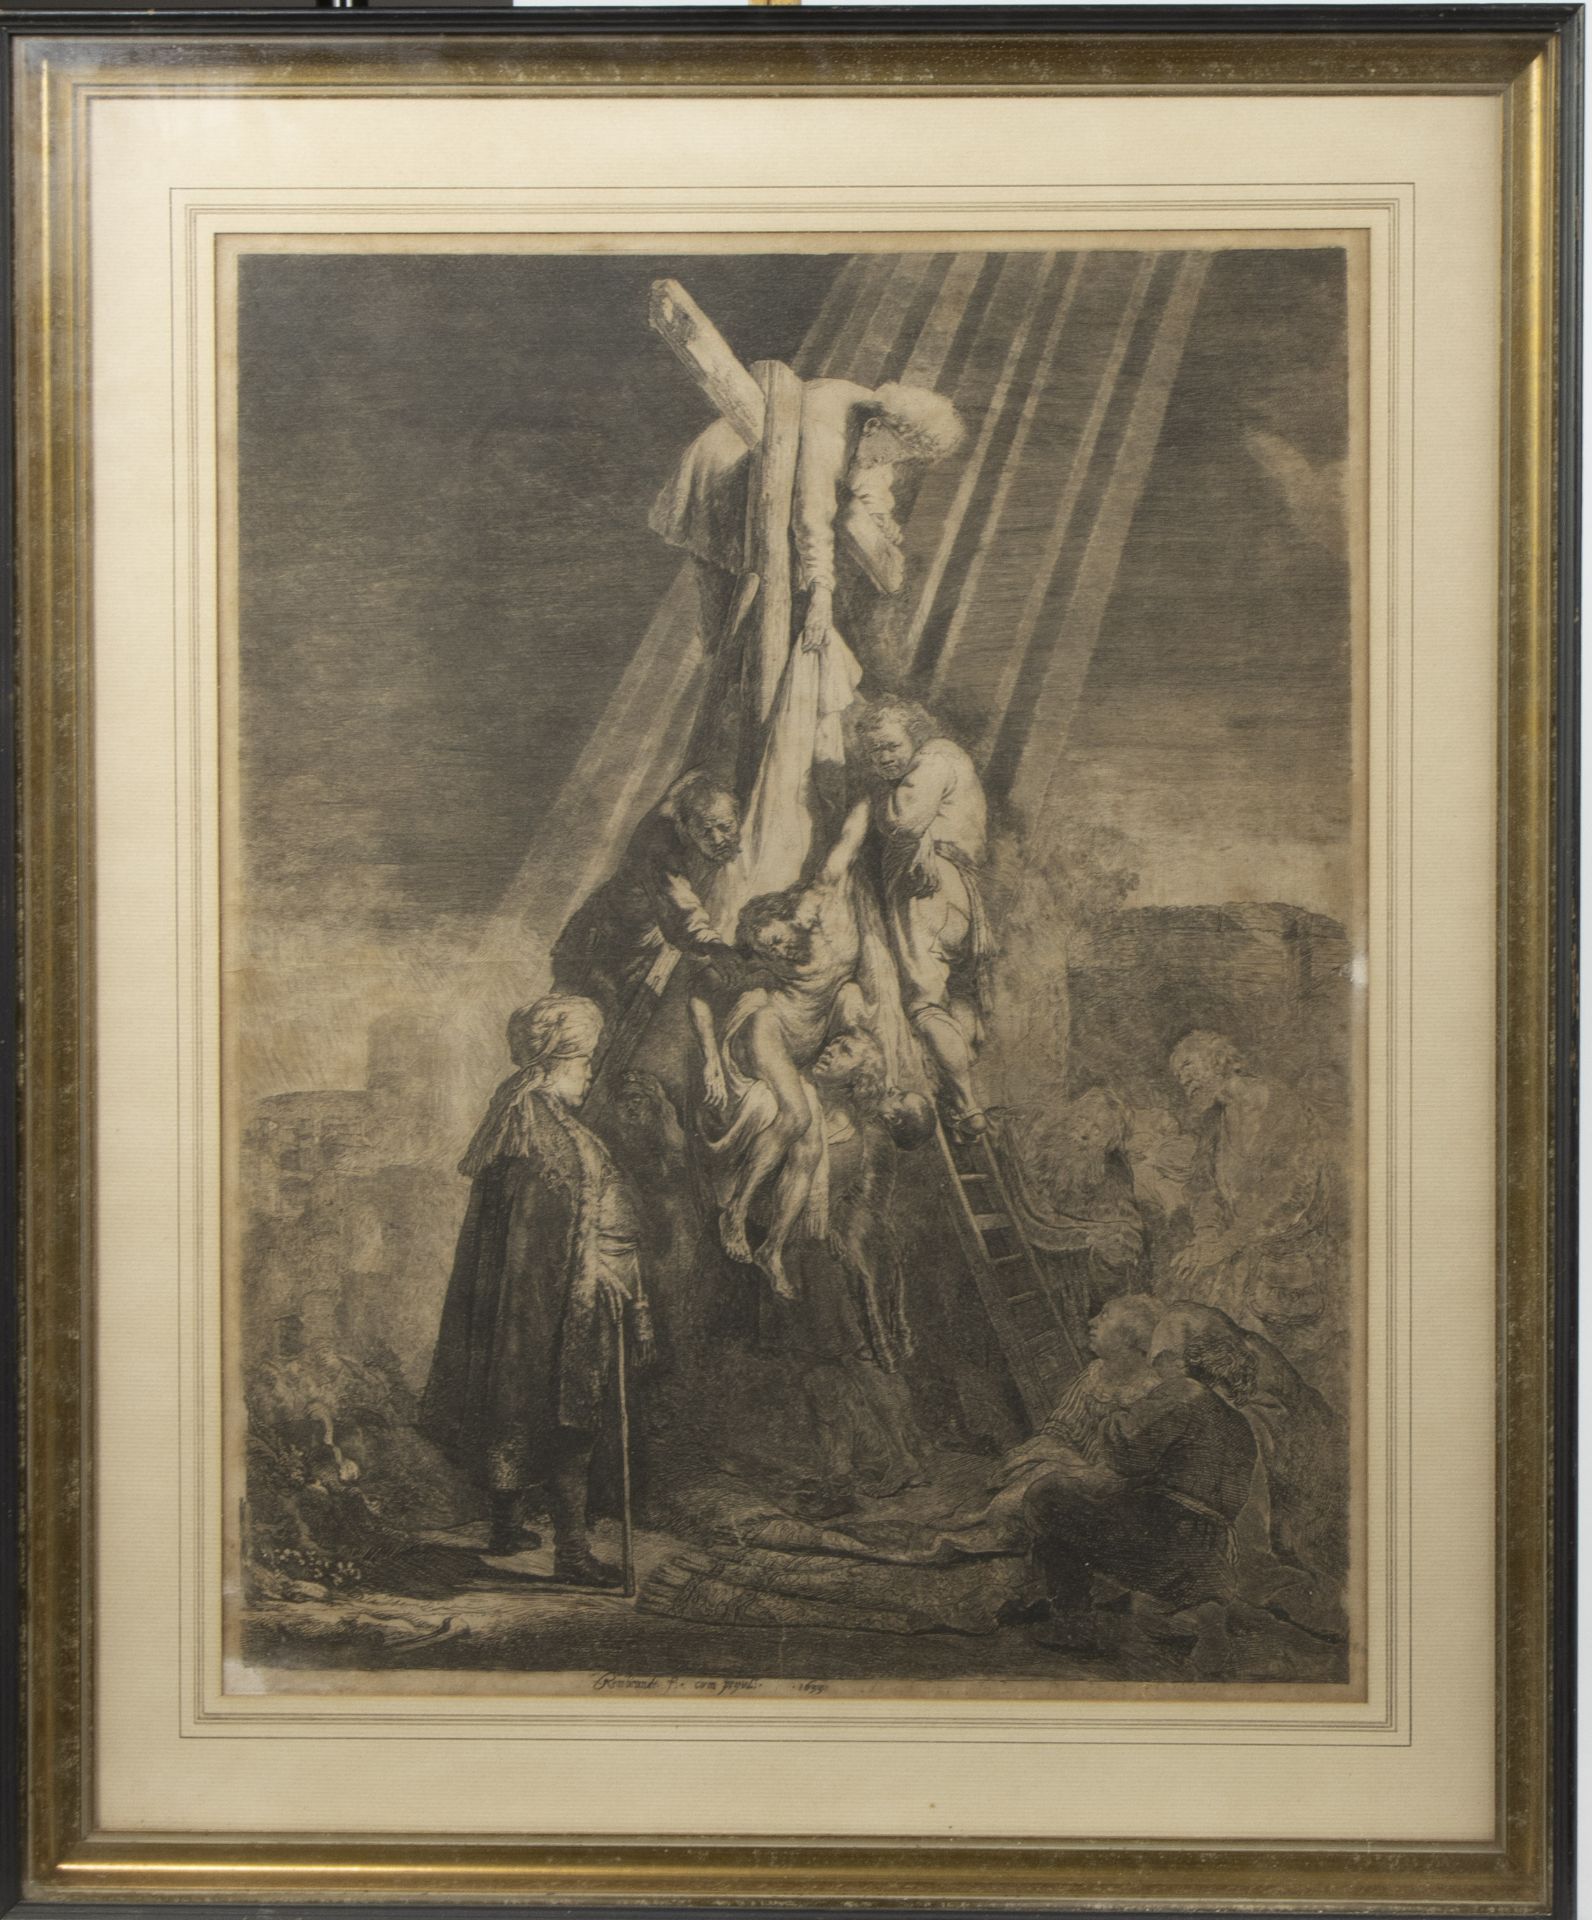 Rembrandt Harmensz van Rijn (1606-1669) - The Descent from the Cross - 1633 - 18th century print - Image 2 of 5